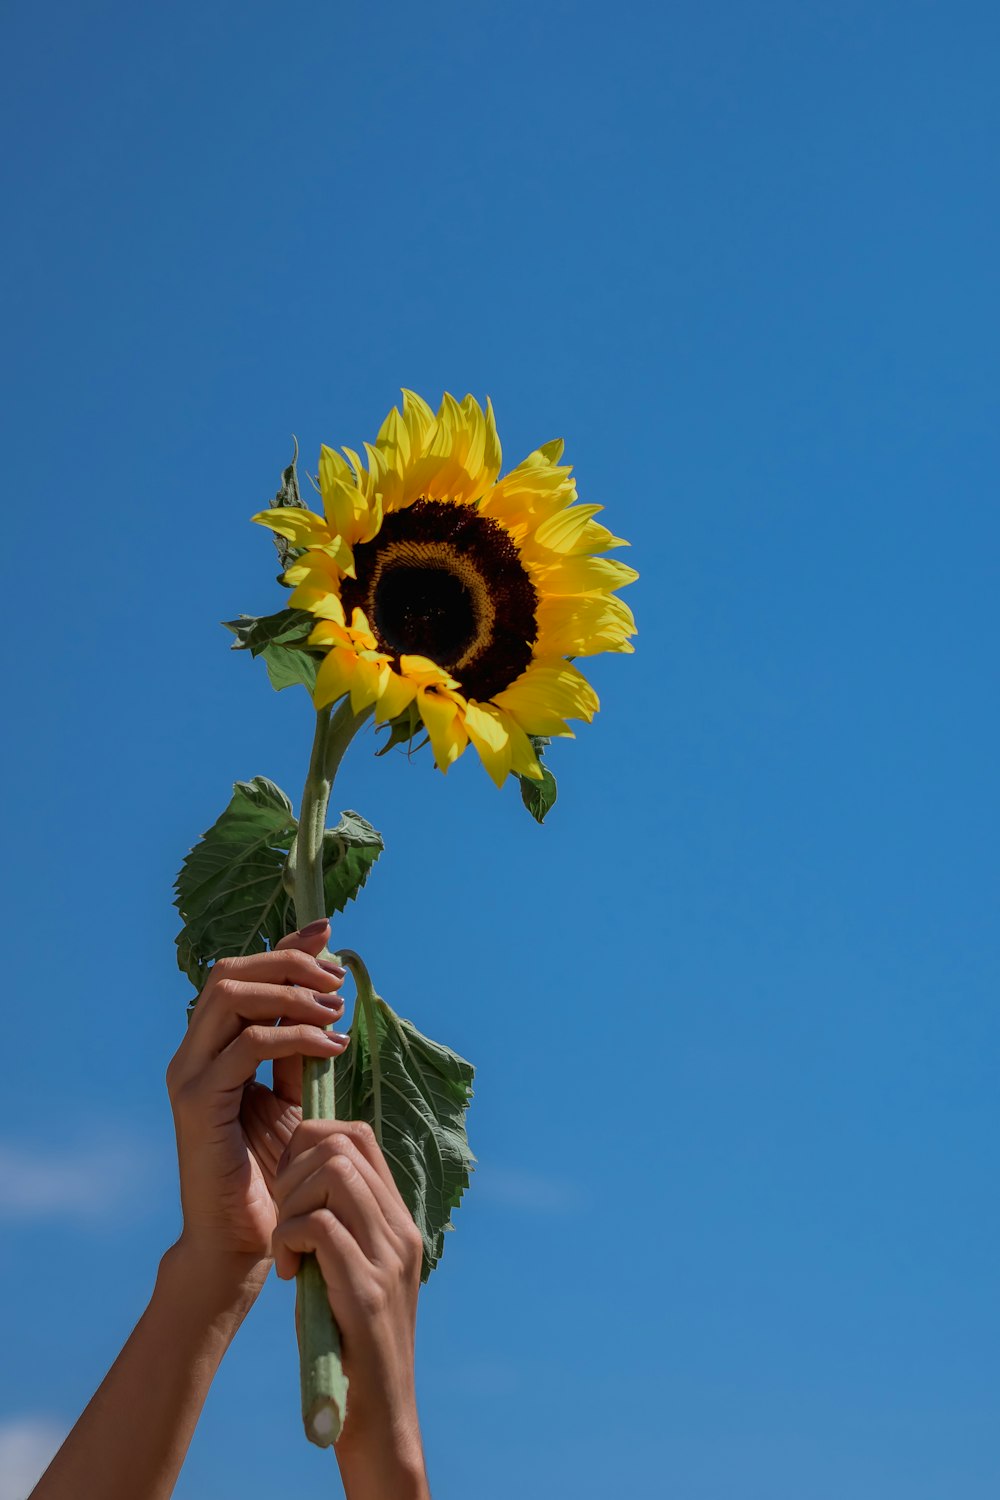 person holding sunflower under blue sky during daytime